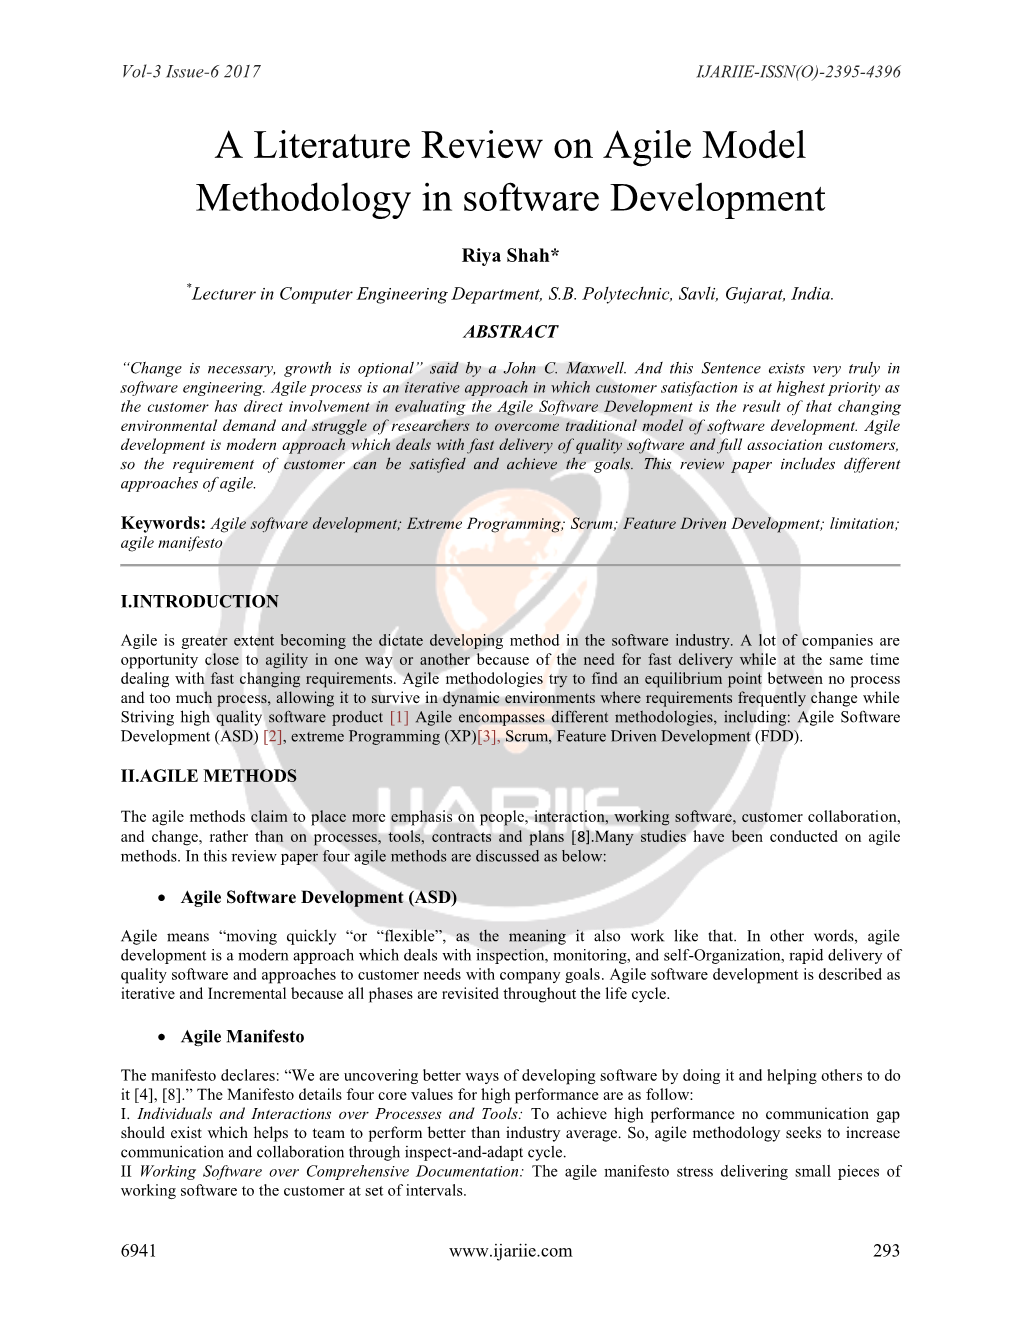 literature review on software industry